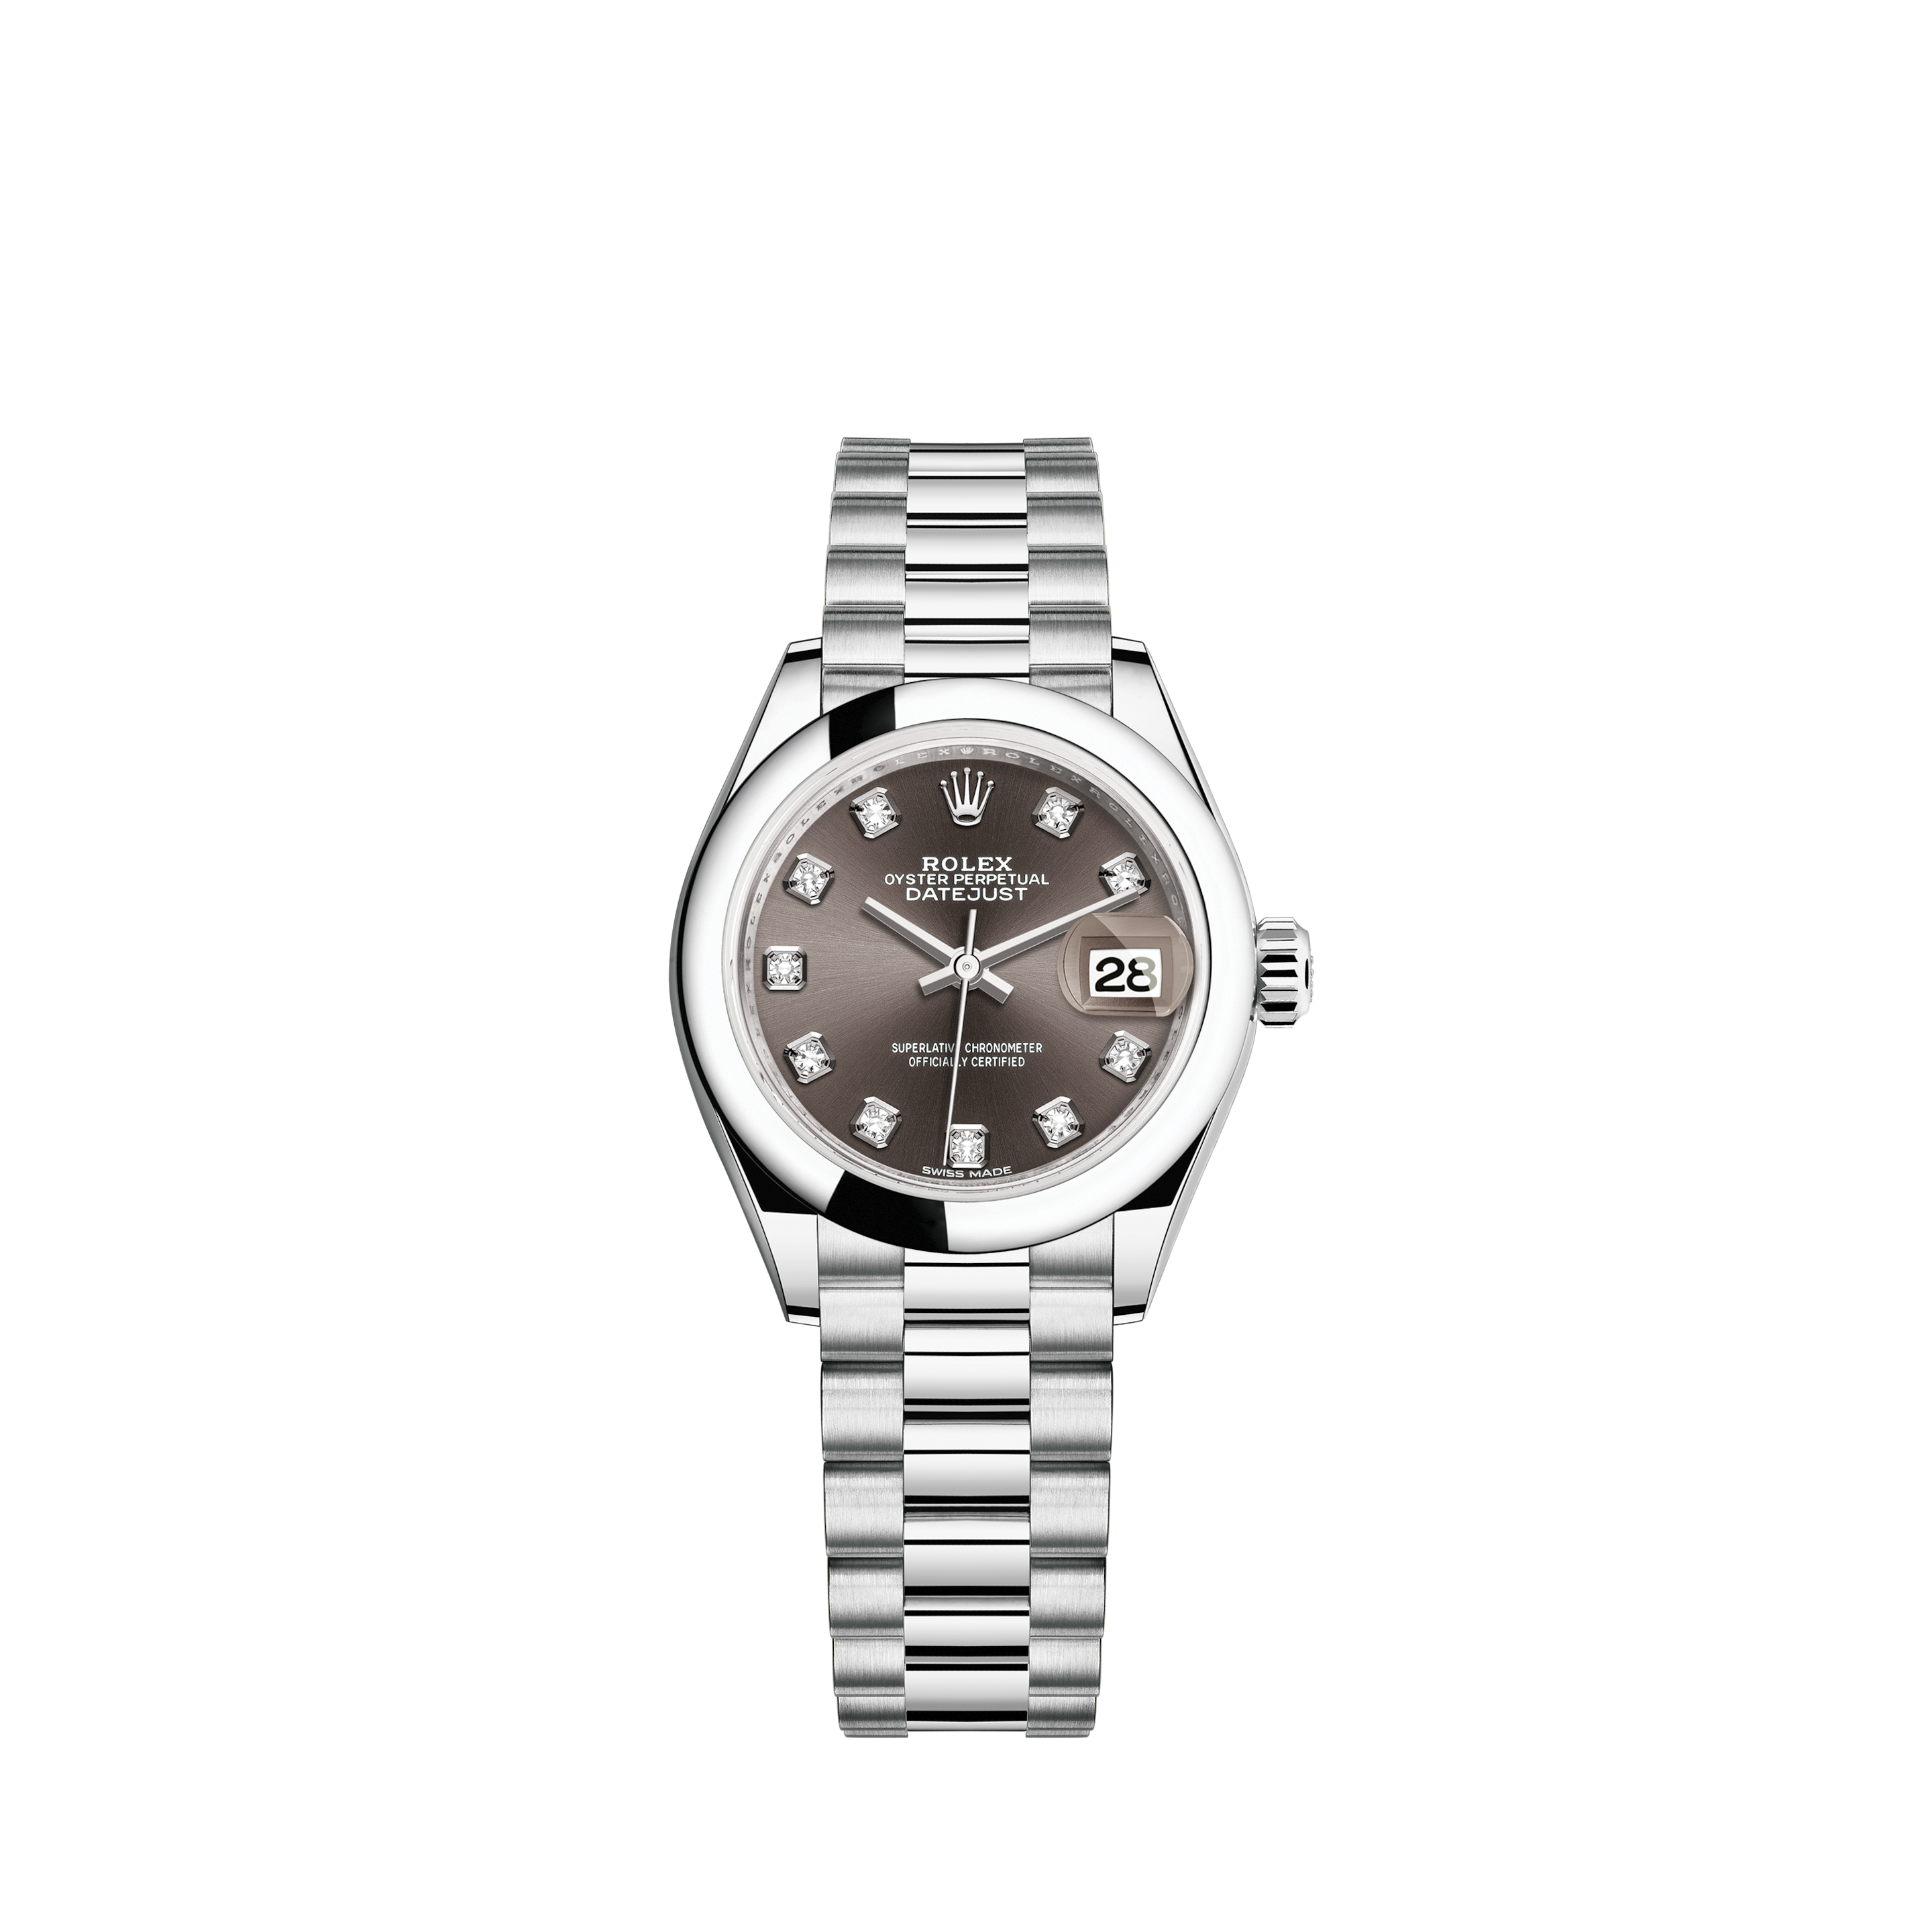 Rolex Lady-Datejust 26 - 69173 in excellent condition